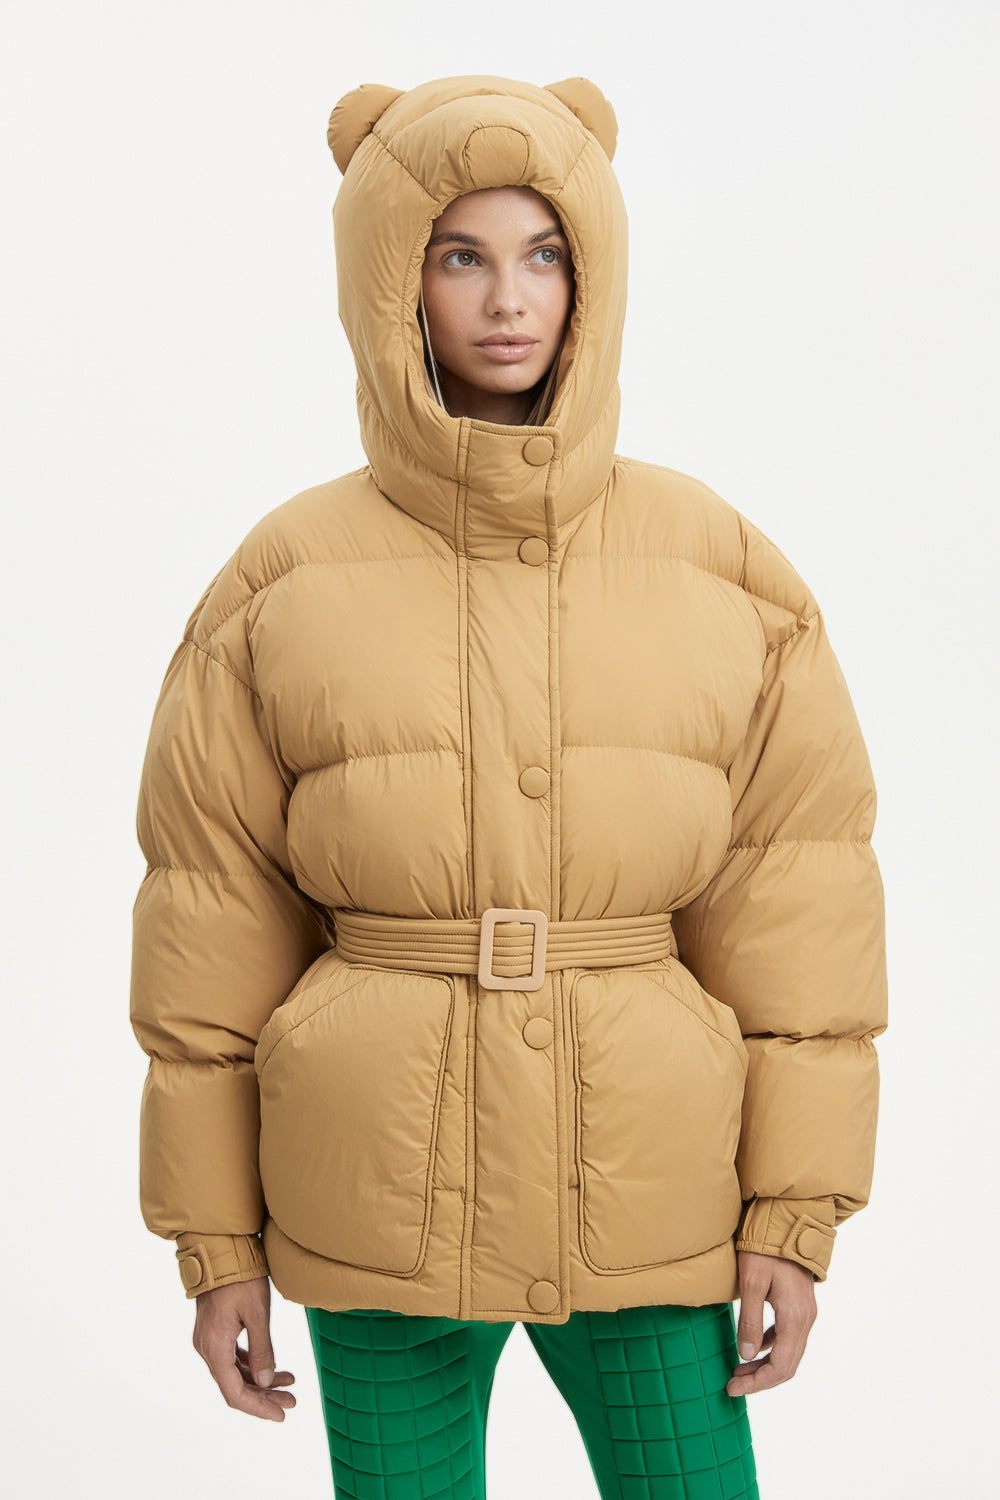 Bear white goose down yellow puffer jacket for winter 